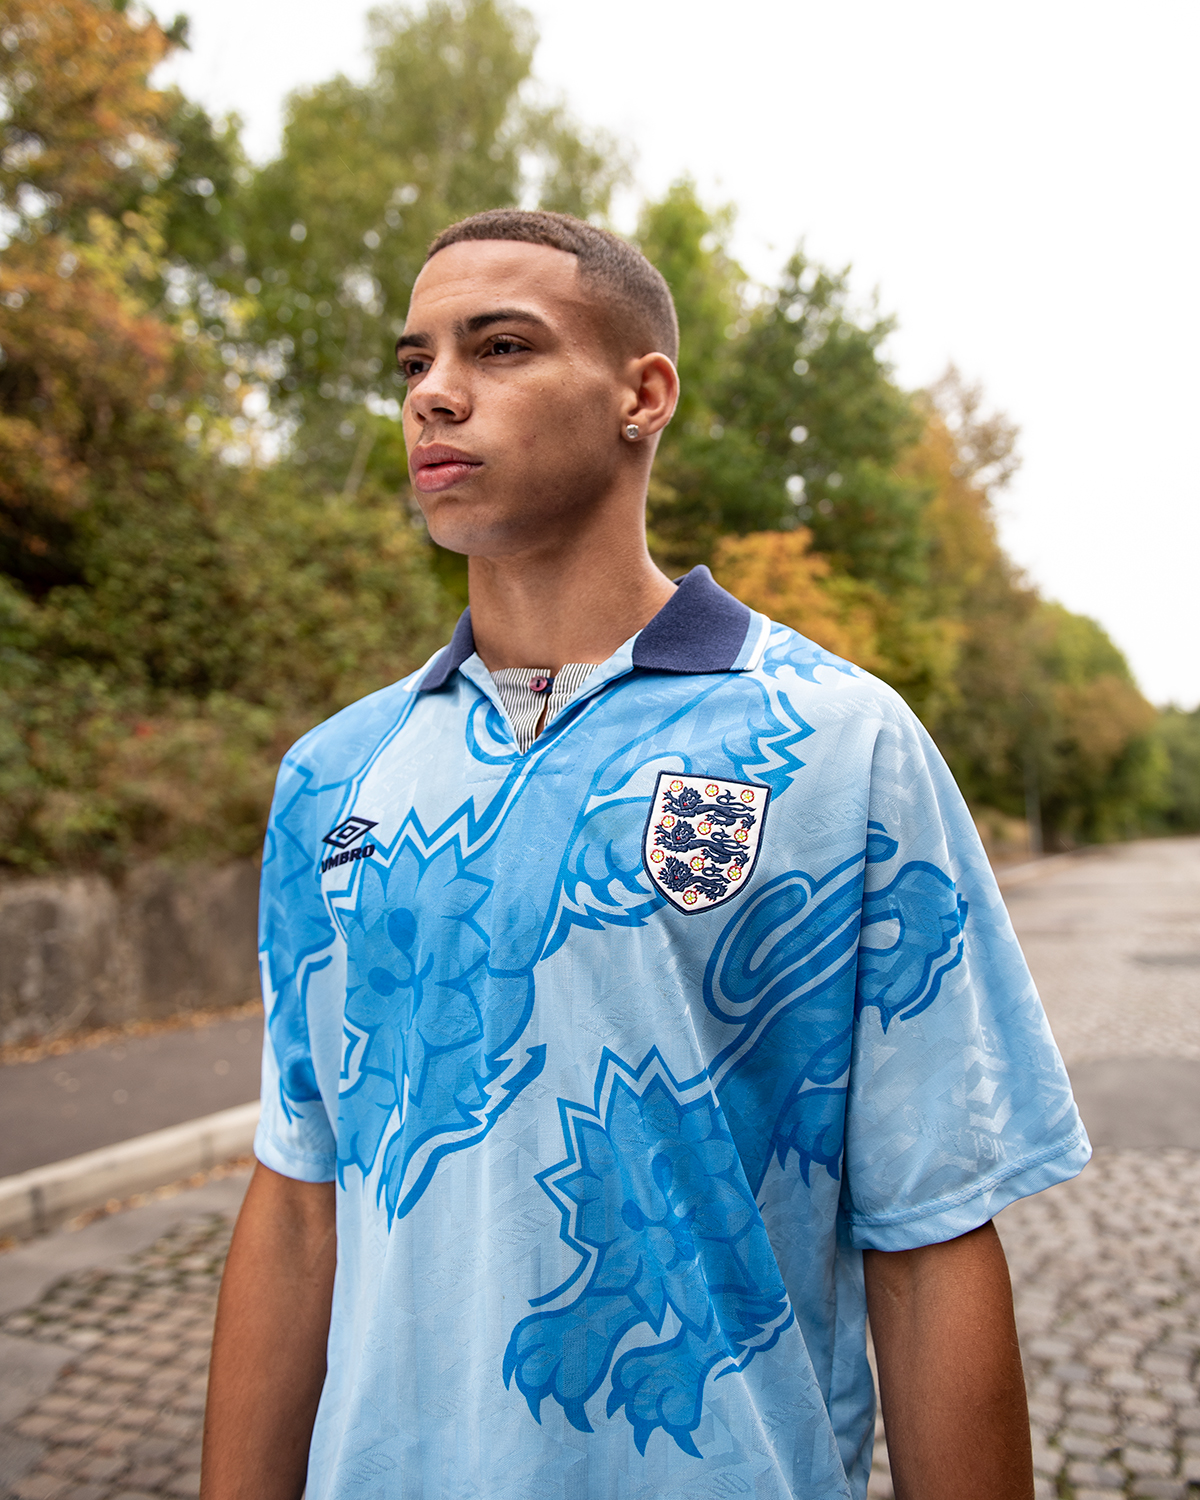 mout ontmoeten Ronde Classic Football Shirts on Twitter: "England 1992 Third by Umbro 🦁 One of  England's best ever shirts? Shop this and more England products via the  link below! 🛒 Shop Here - https://t.co/2Ai4vbG1k4